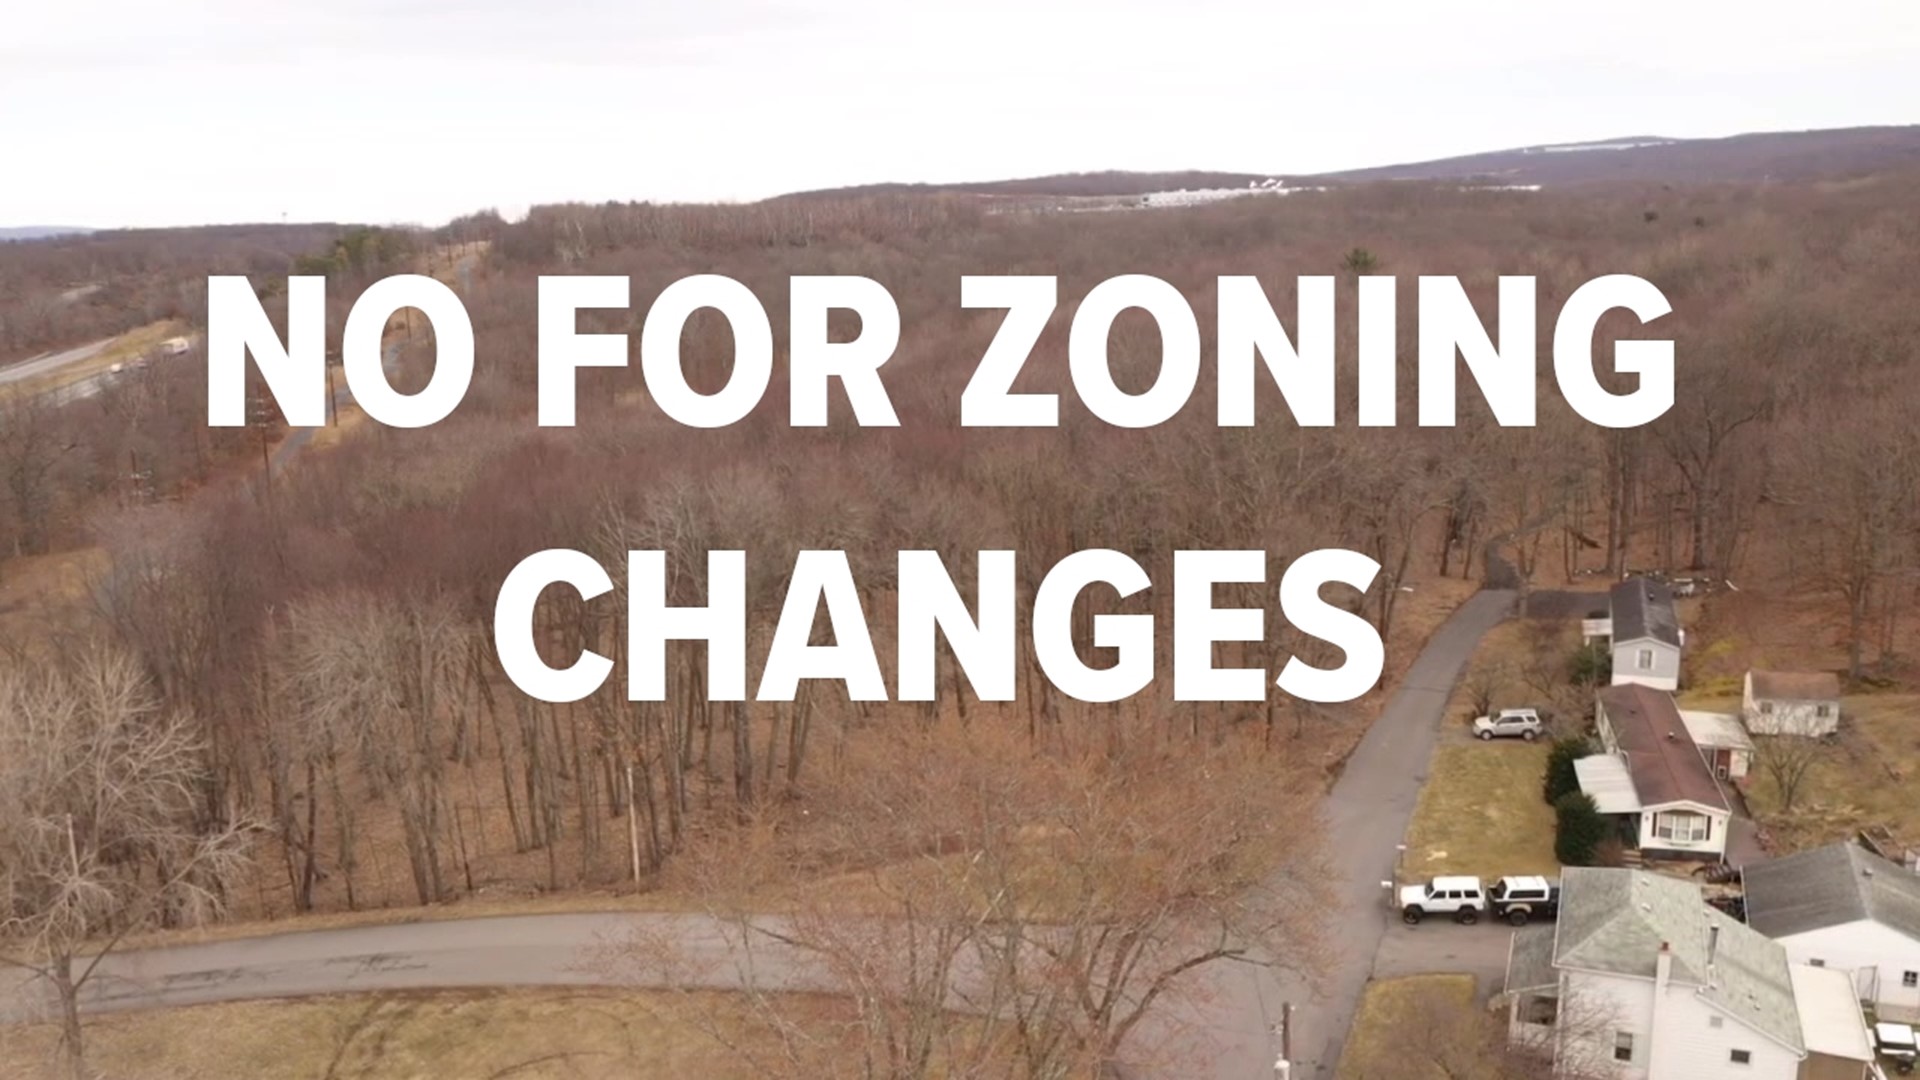 Proposed zoning changes that could have transformed more than 400 acres of woods into warehouses.